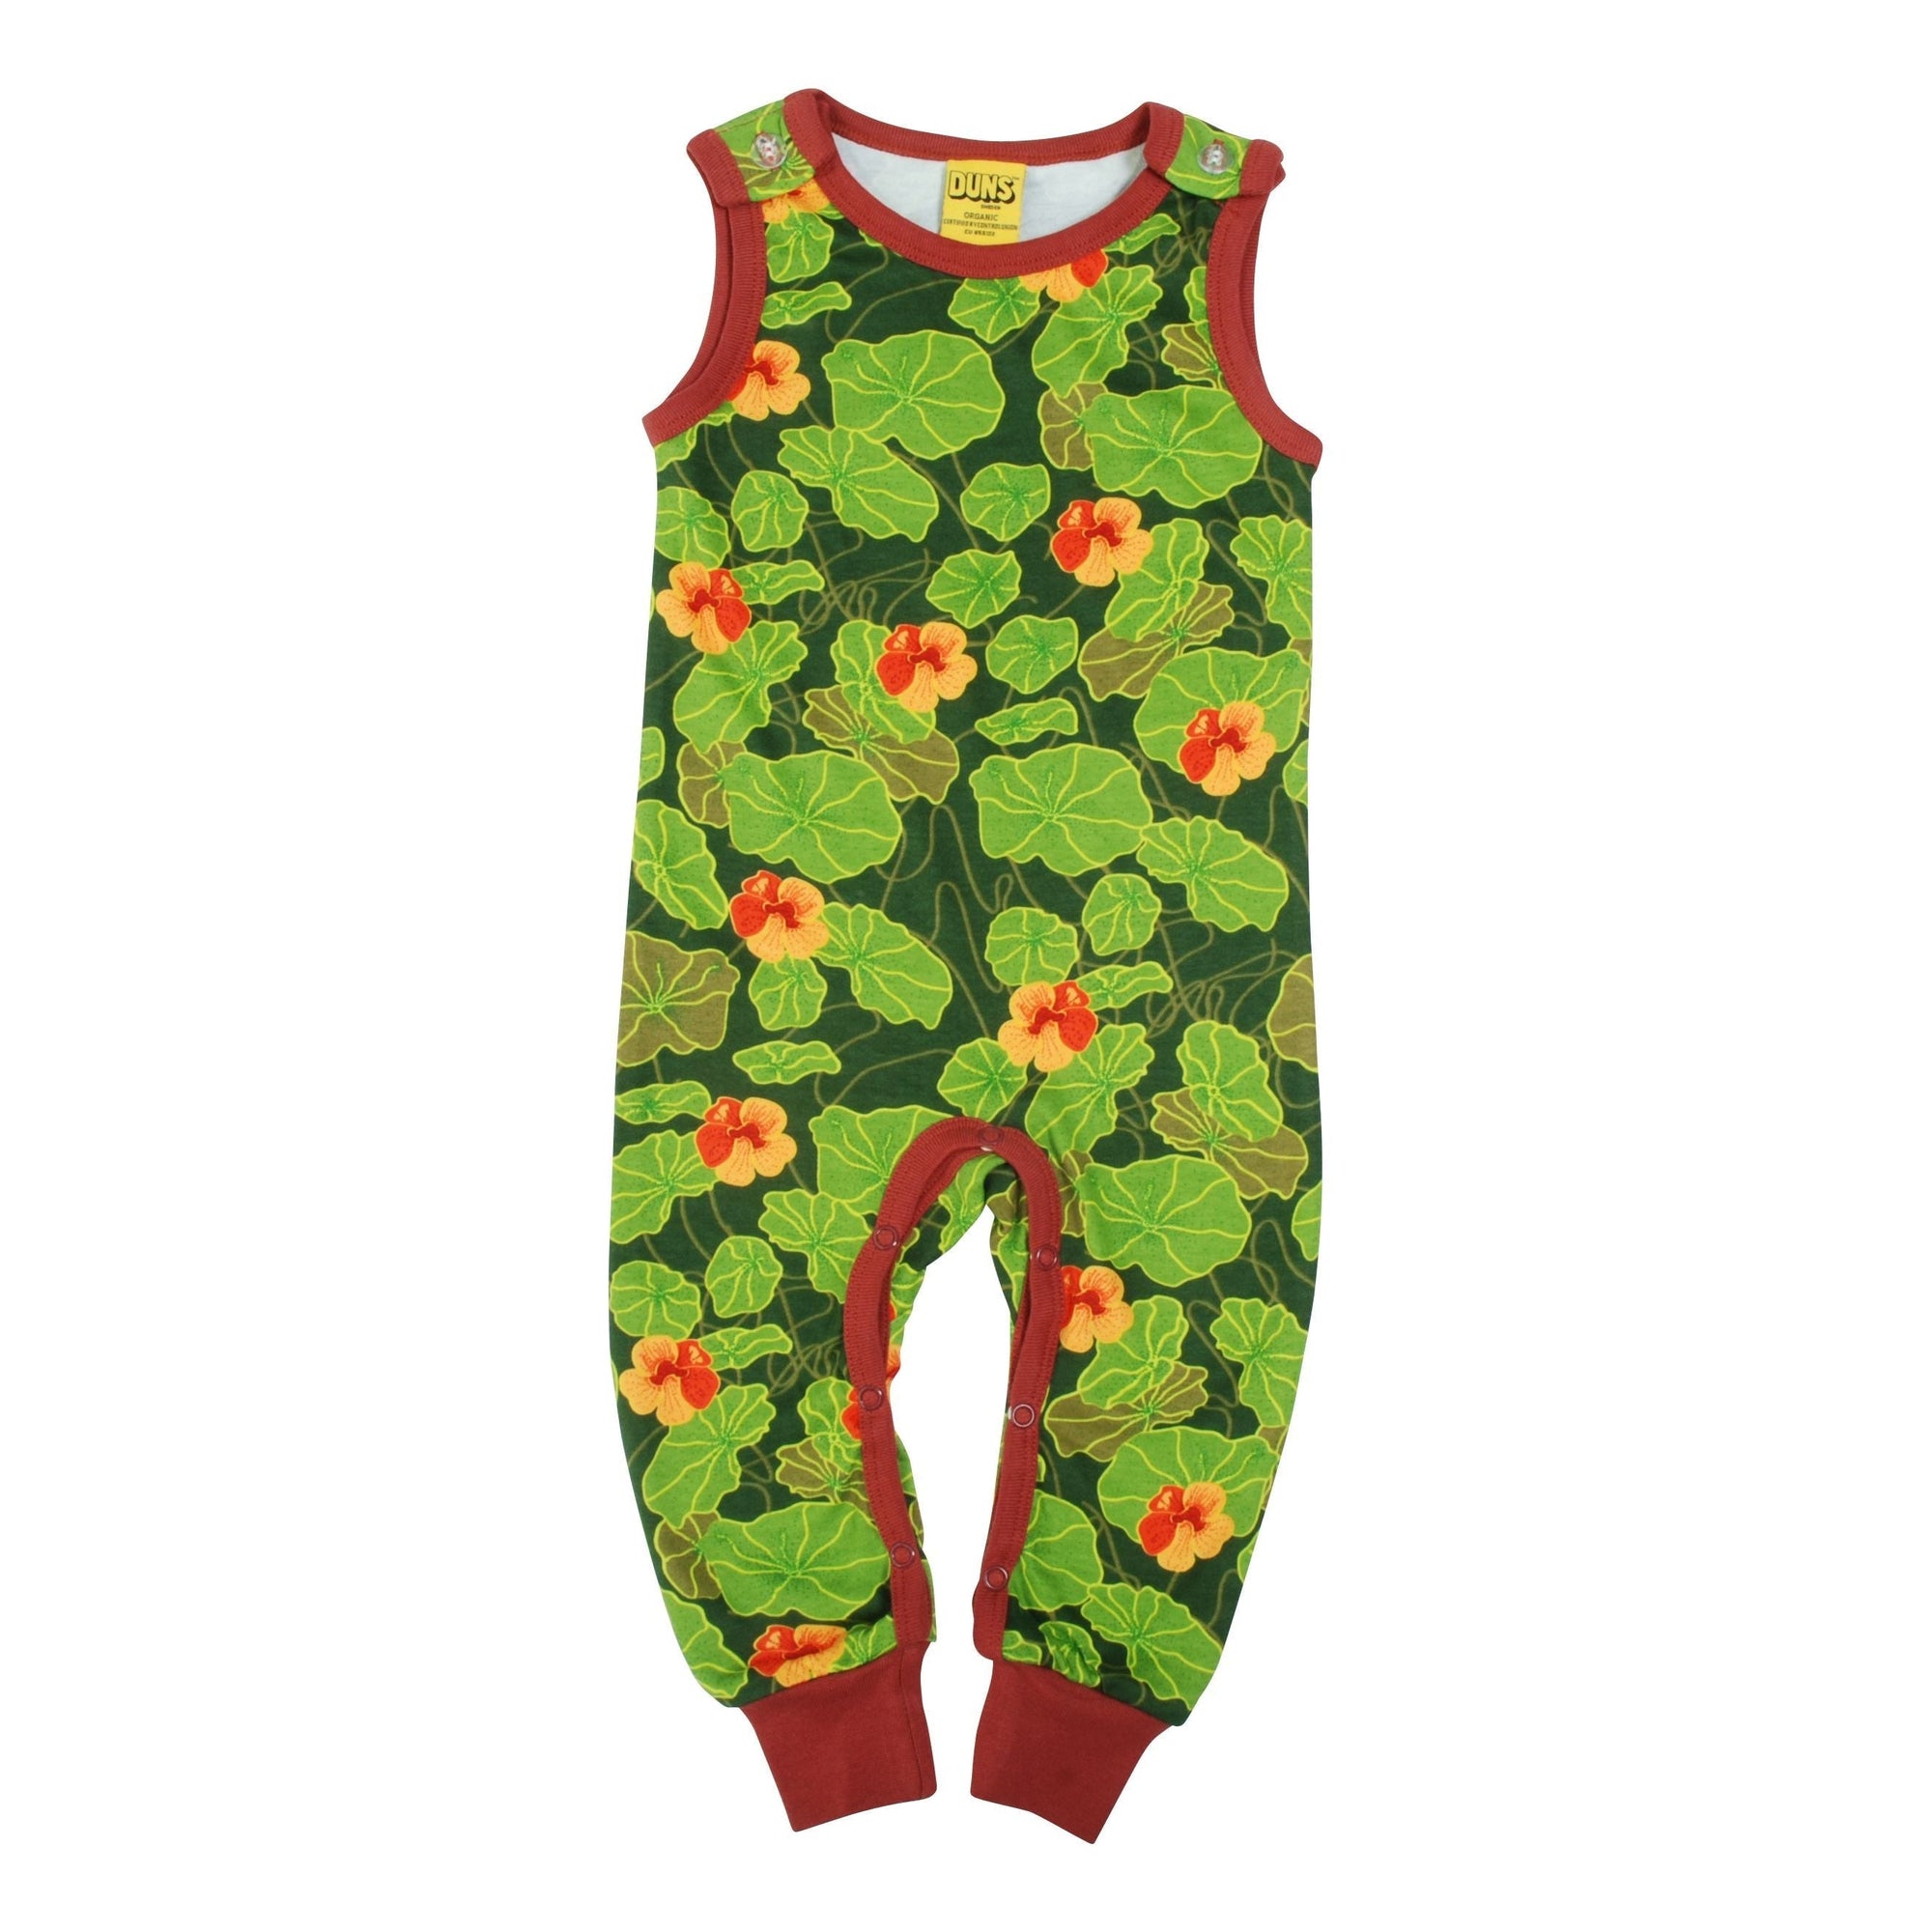 Monk's Cress - Greener Pastures Dungarees - 2 Left Size 4-6 months & 4-5 years-Duns Sweden-Modern Rascals